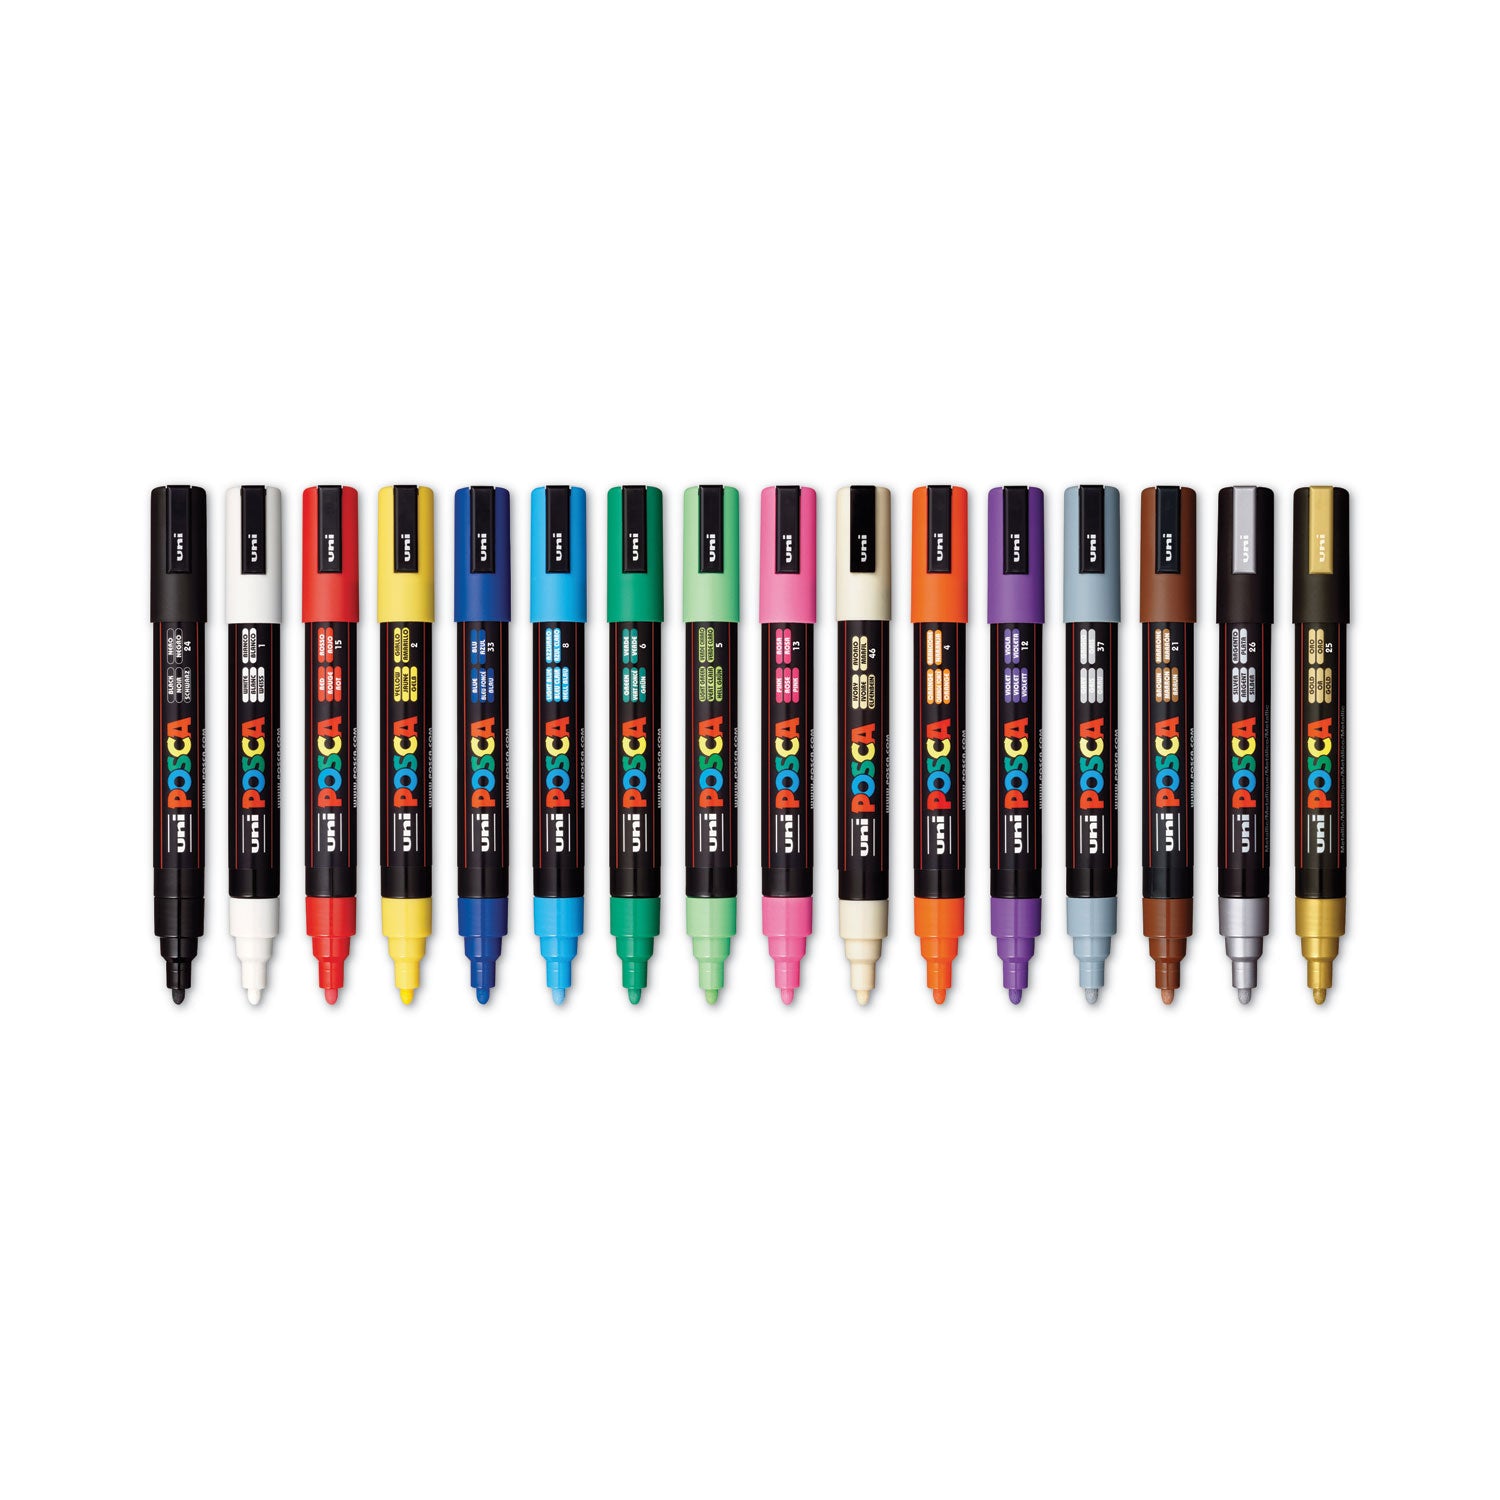 permanent-specialty-marker-medium-bullet-tip-assorted-colors-16-pack_ubcpc5m16c - 3